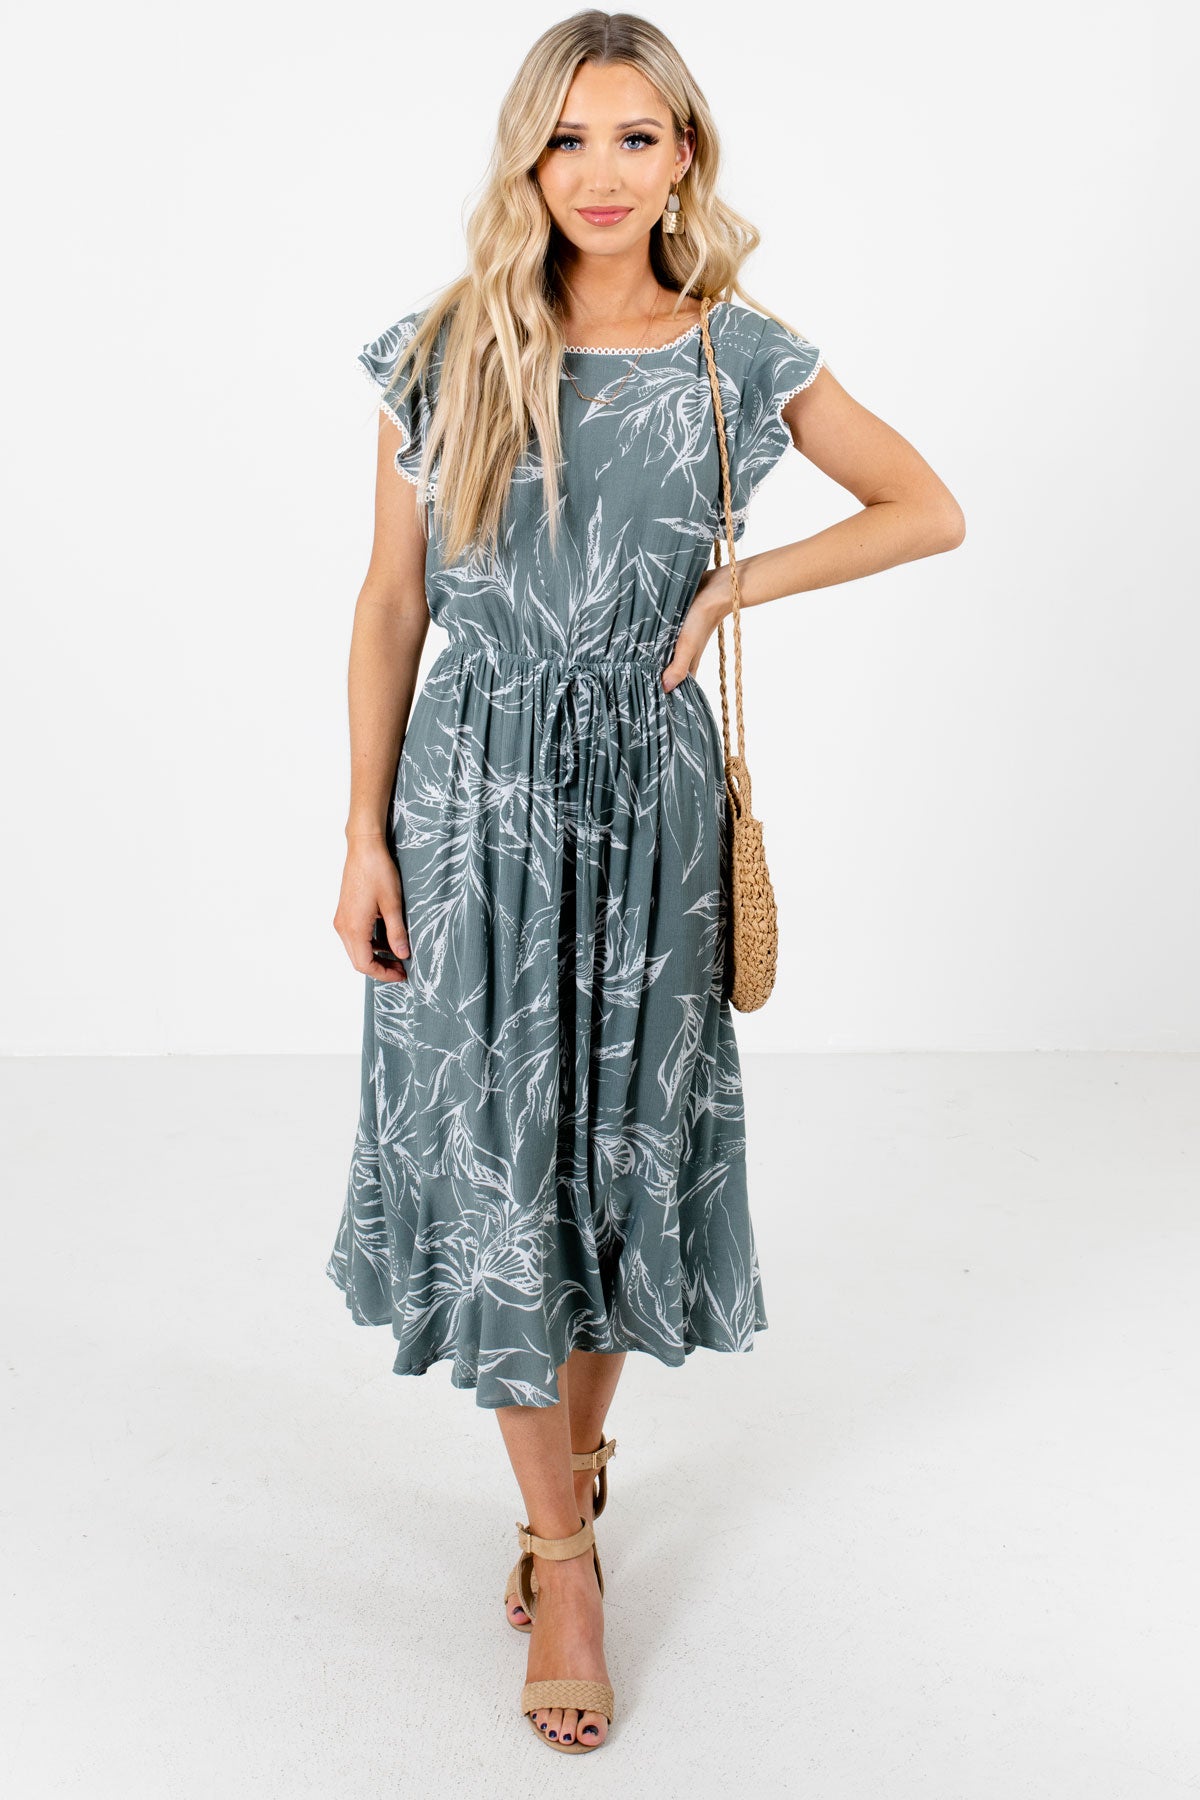 Green Cute and Comfortable Boutique Midi Dresses for Women